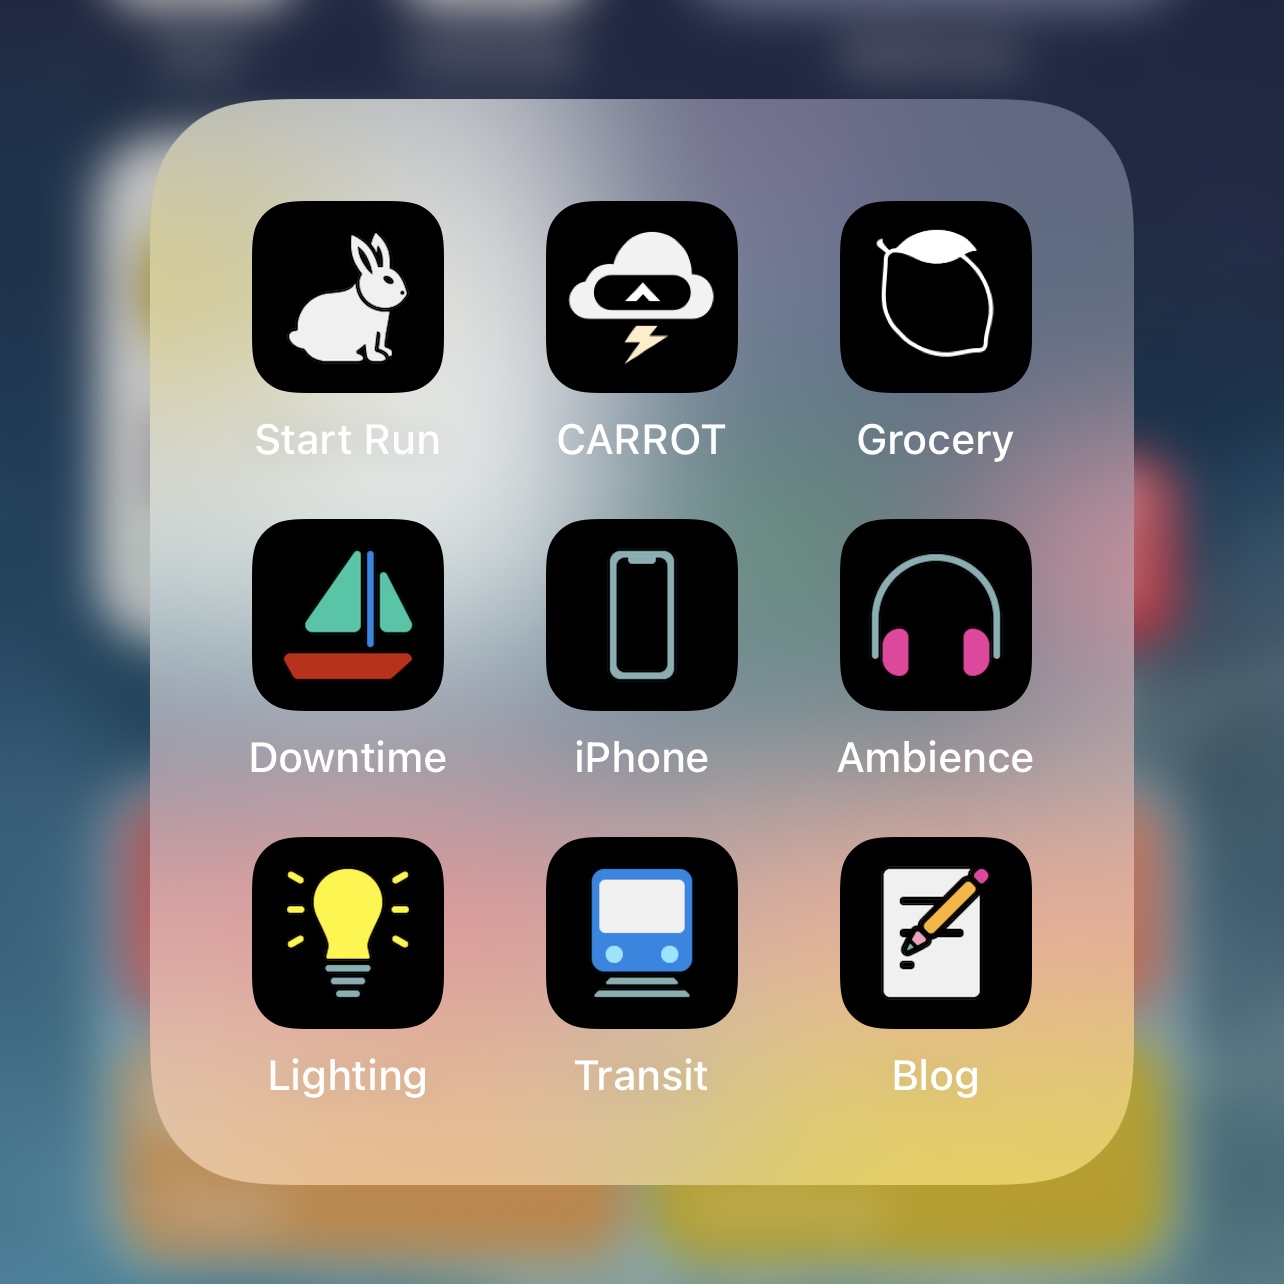 An iPhone folder containing nine icons arranged in a 3-by-3 grid. From top left to bottom right they read: Start Run, CARROT, Grocery, Downtime, iPhone, Ambience, Lighting, Transit, Blog. The icons are images on black backgrounds which reflect the names.